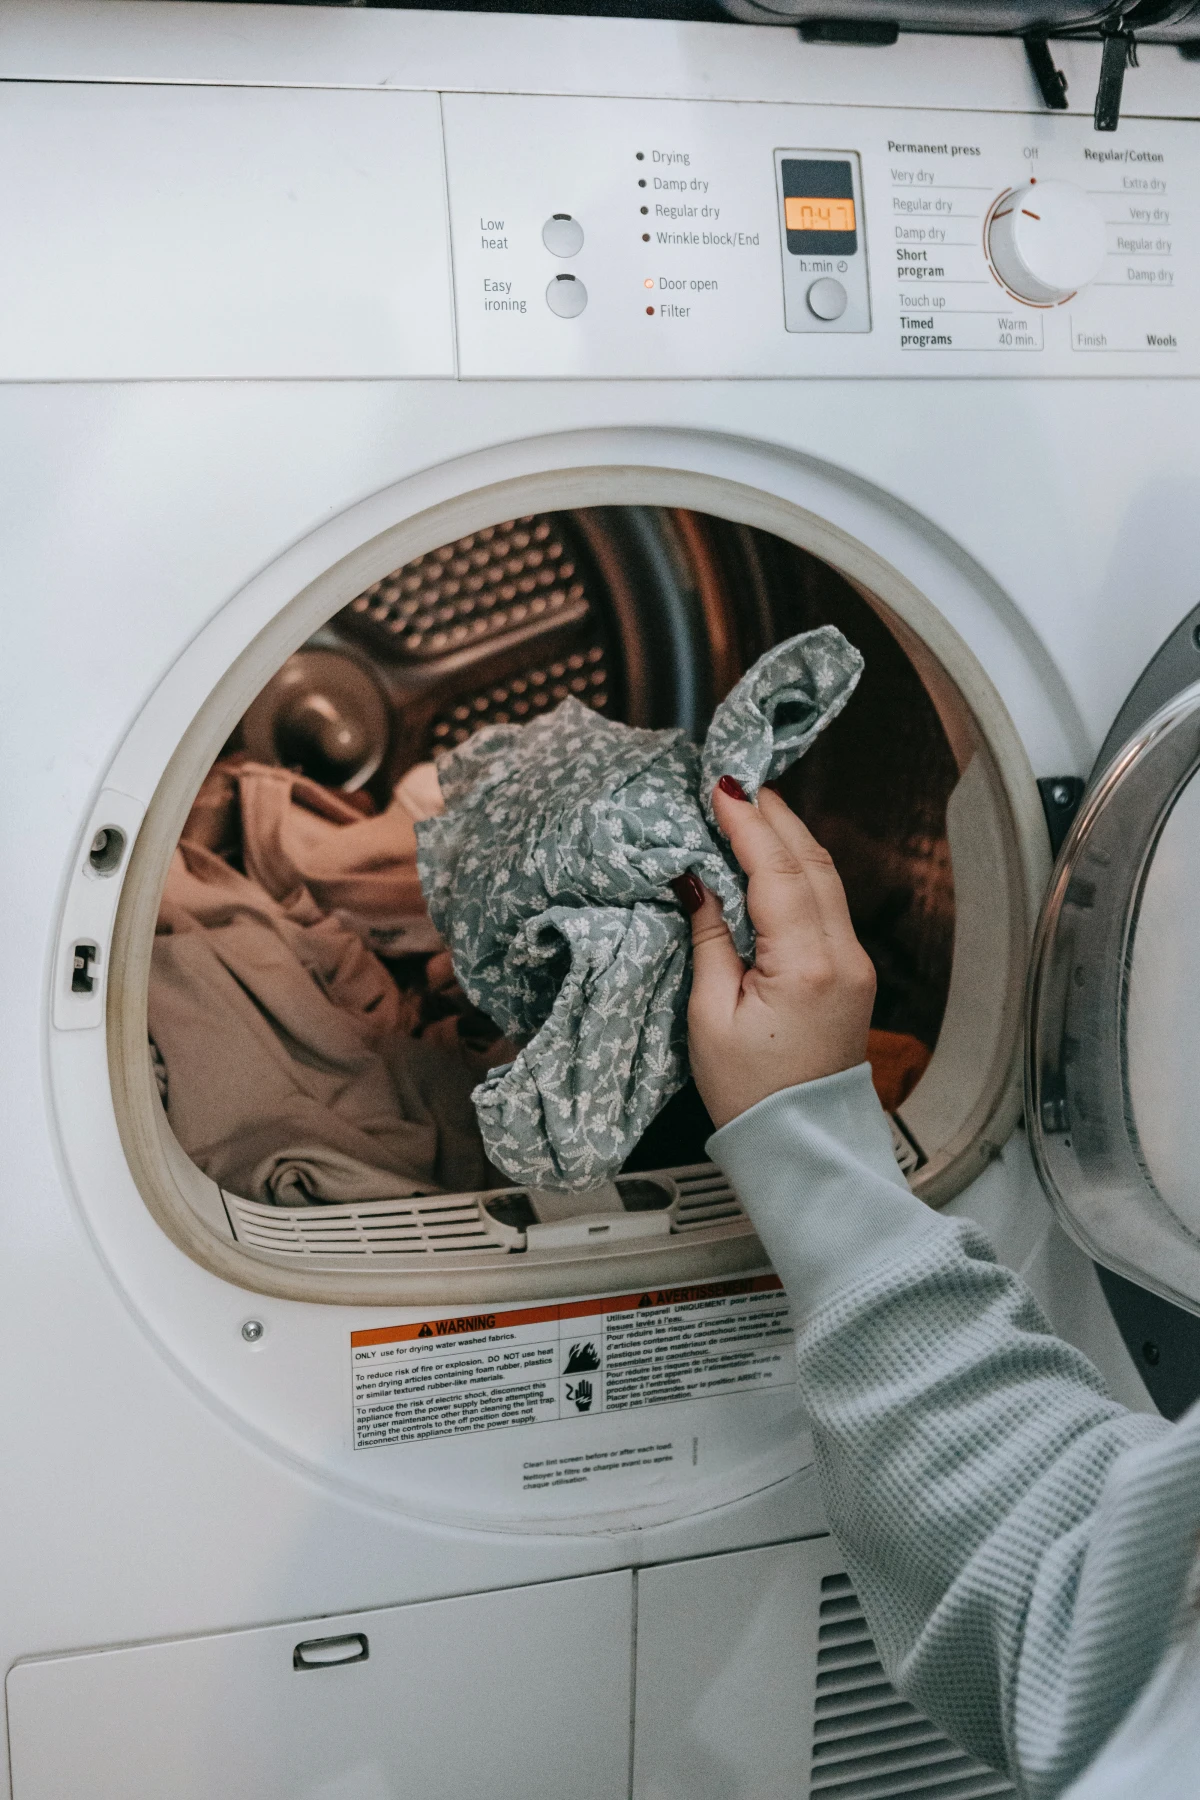 person putting clothes in washing machine